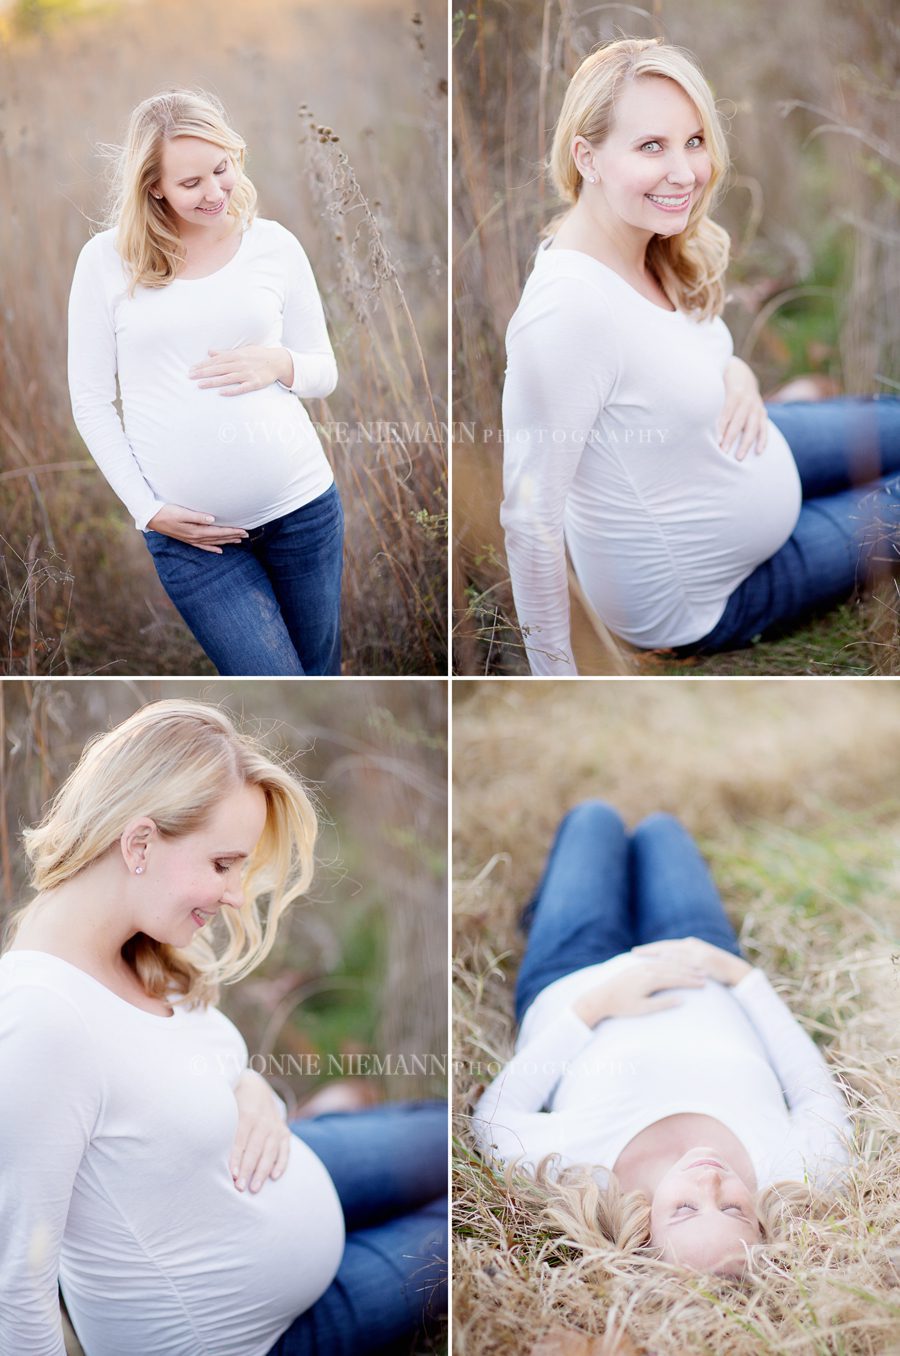 Natural maternity photos in the Autumn taken by Athens, GA maternity photographer, Yvonne Niemann Photography.